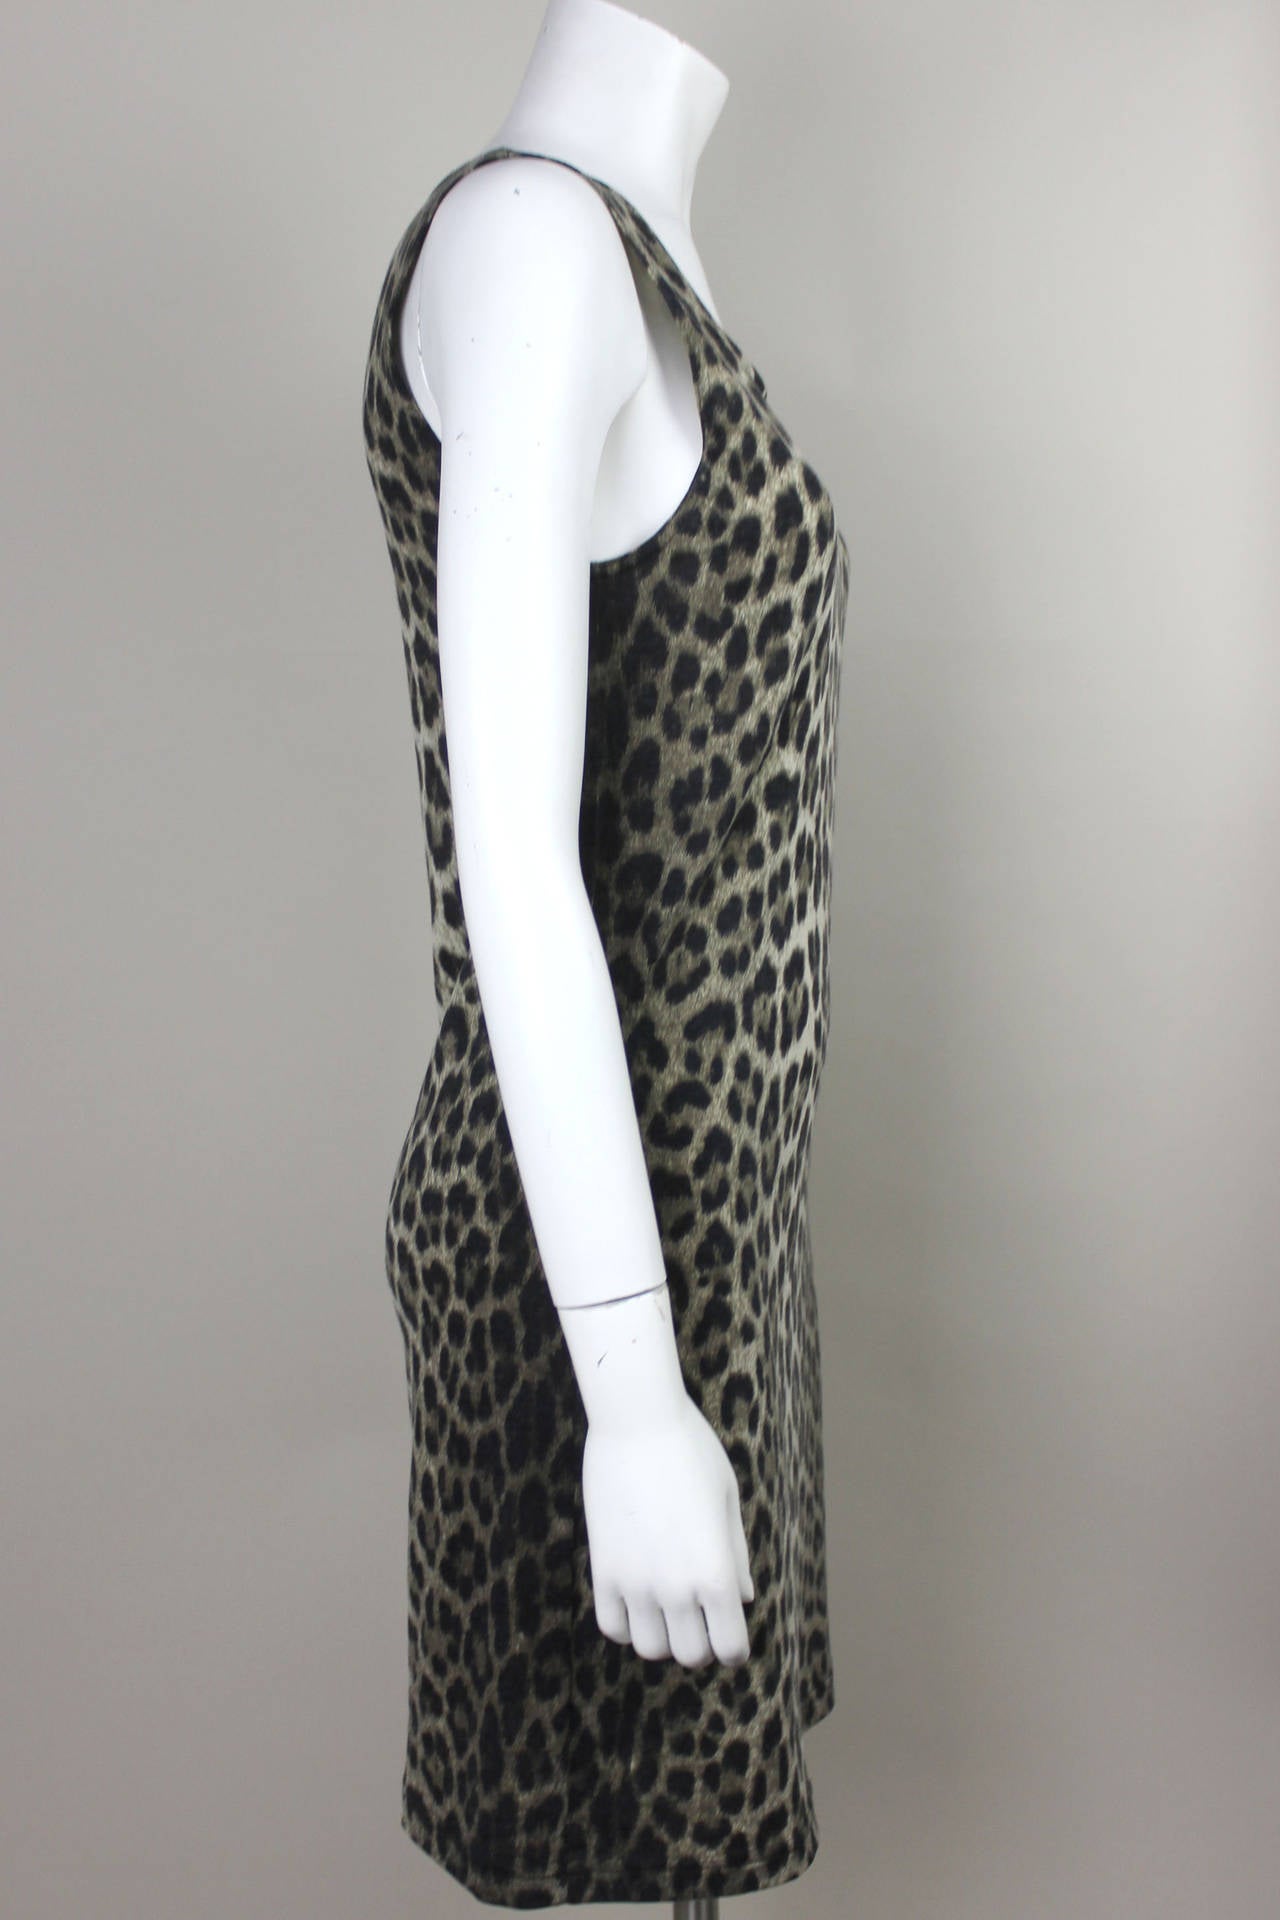 Ozbek Leopard Print Sheath Dress In Excellent Condition In New York, NY